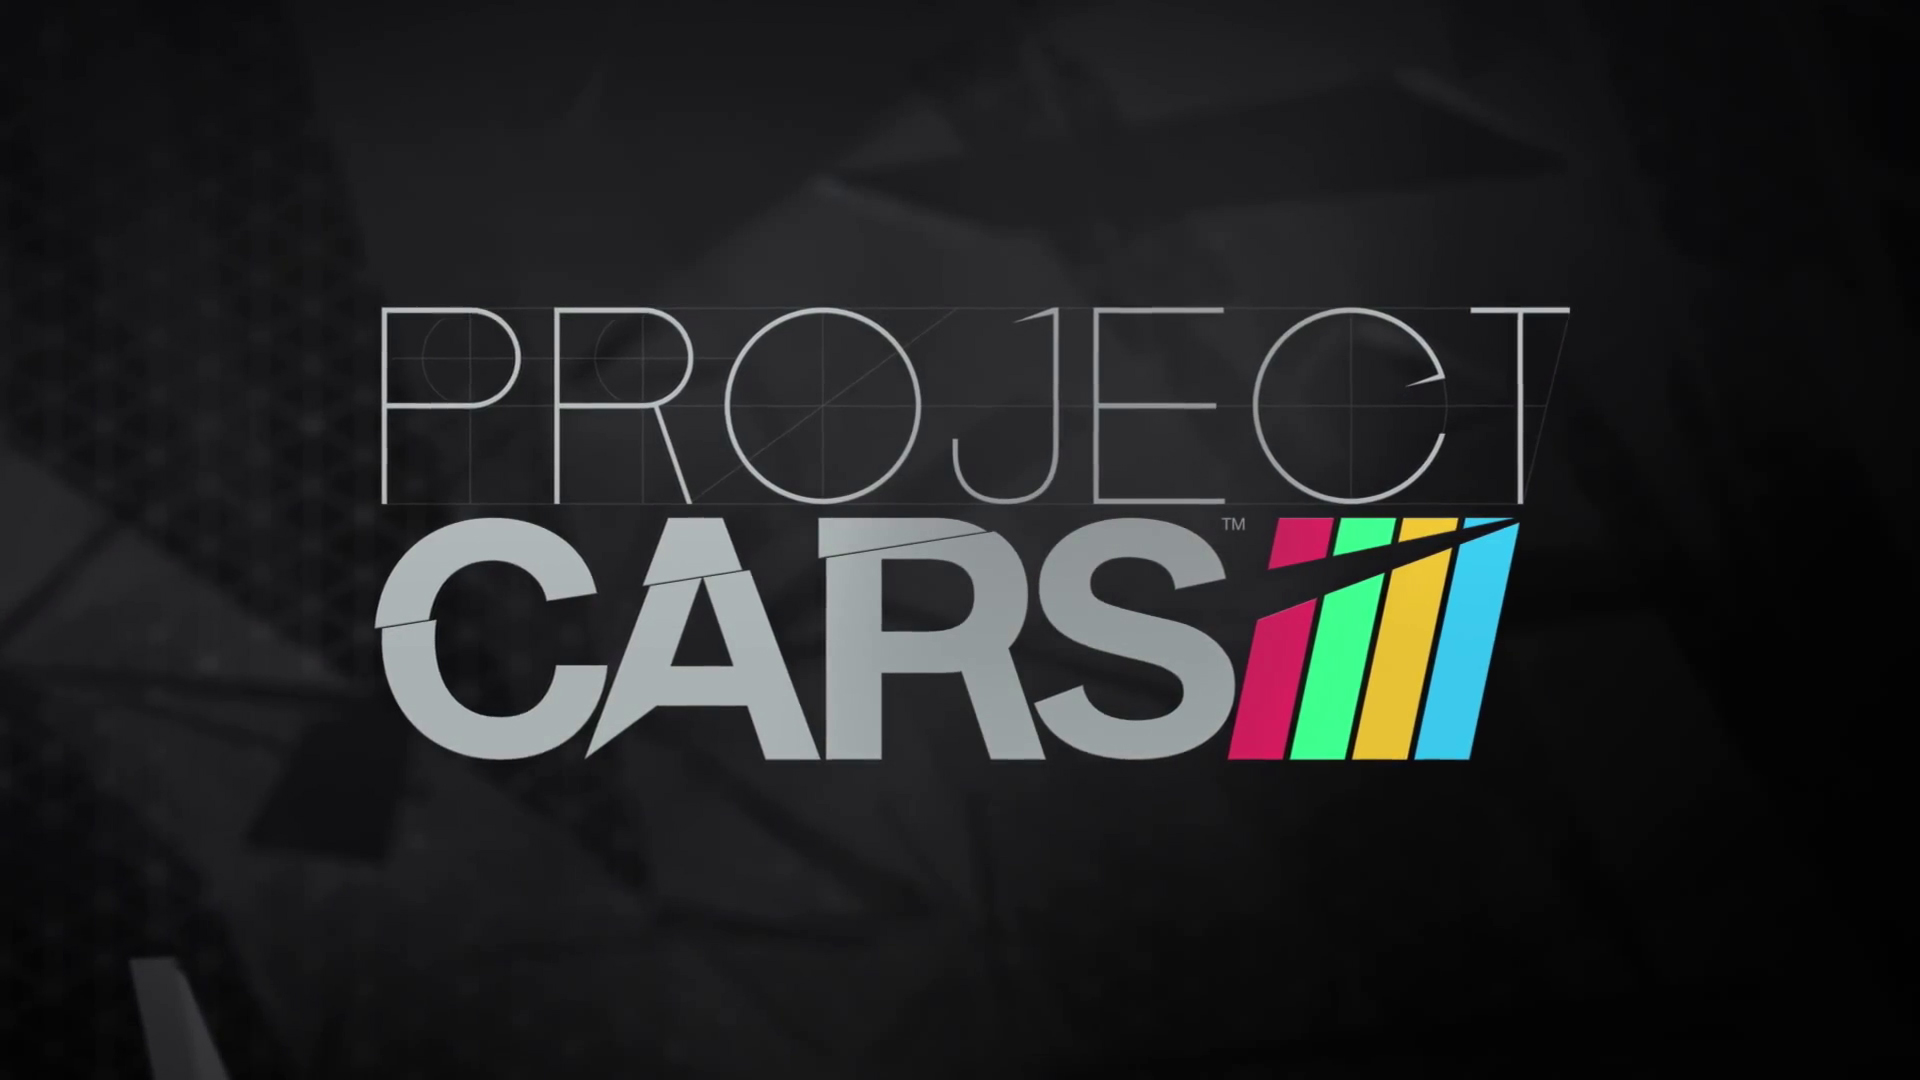 Project yvl. Project cars. Project cars 1. Project cars ps4. Project cars 4.